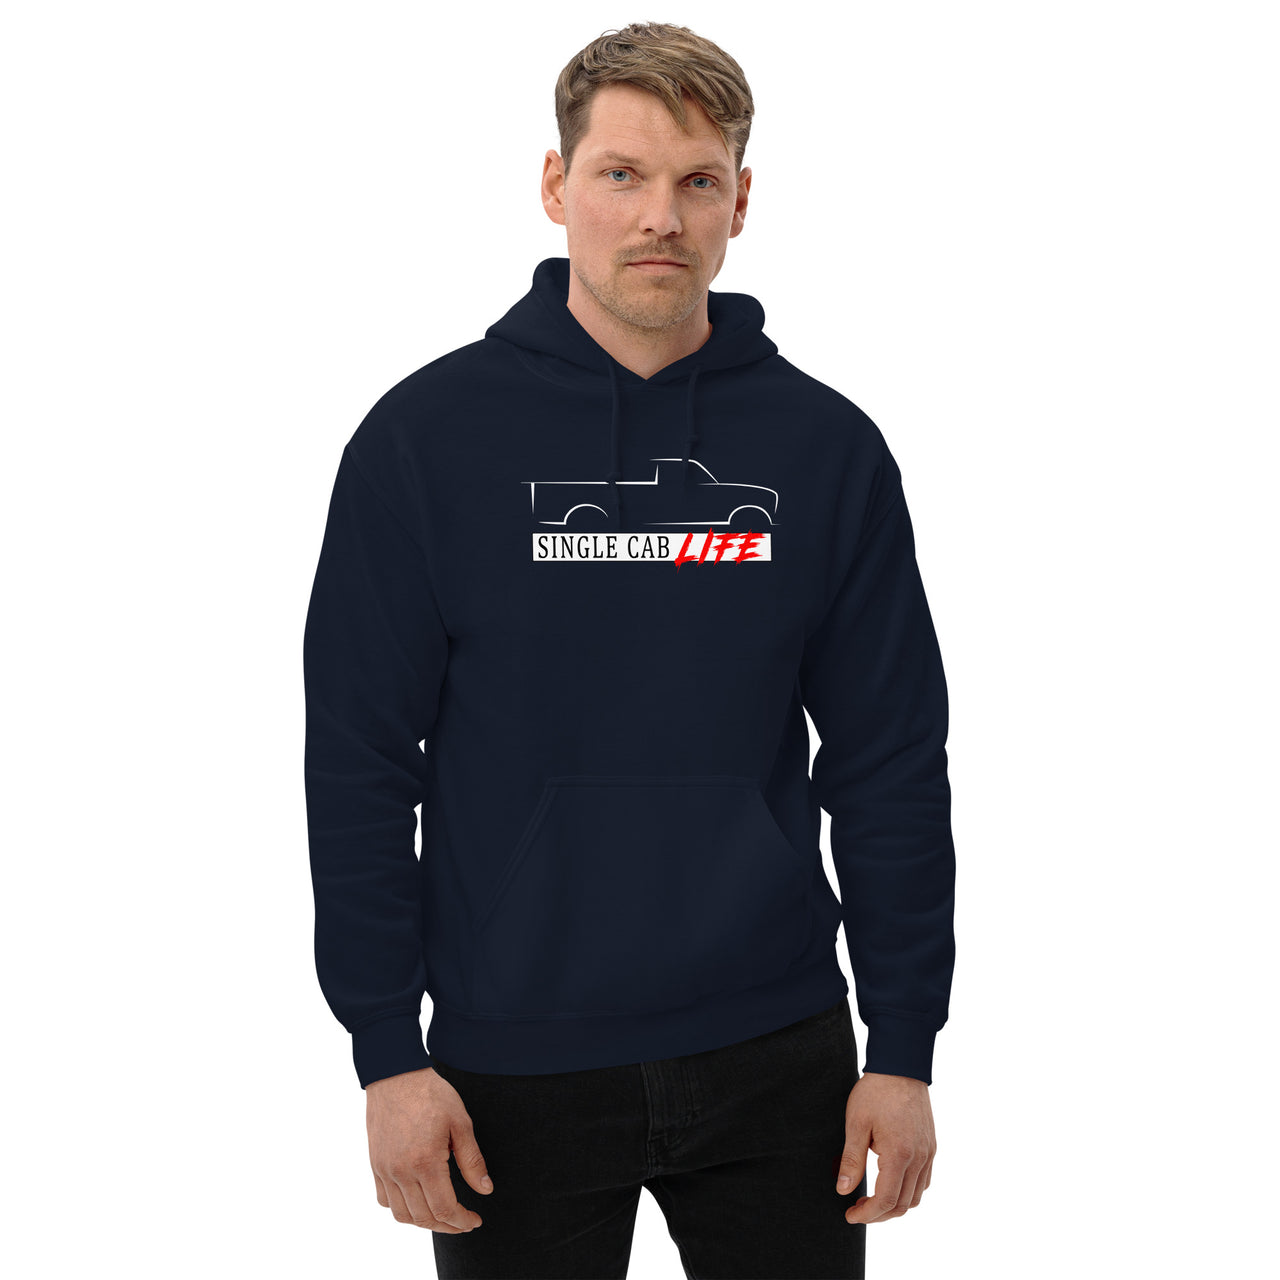 Single Cab Life Truck Hoodie modeled in navy